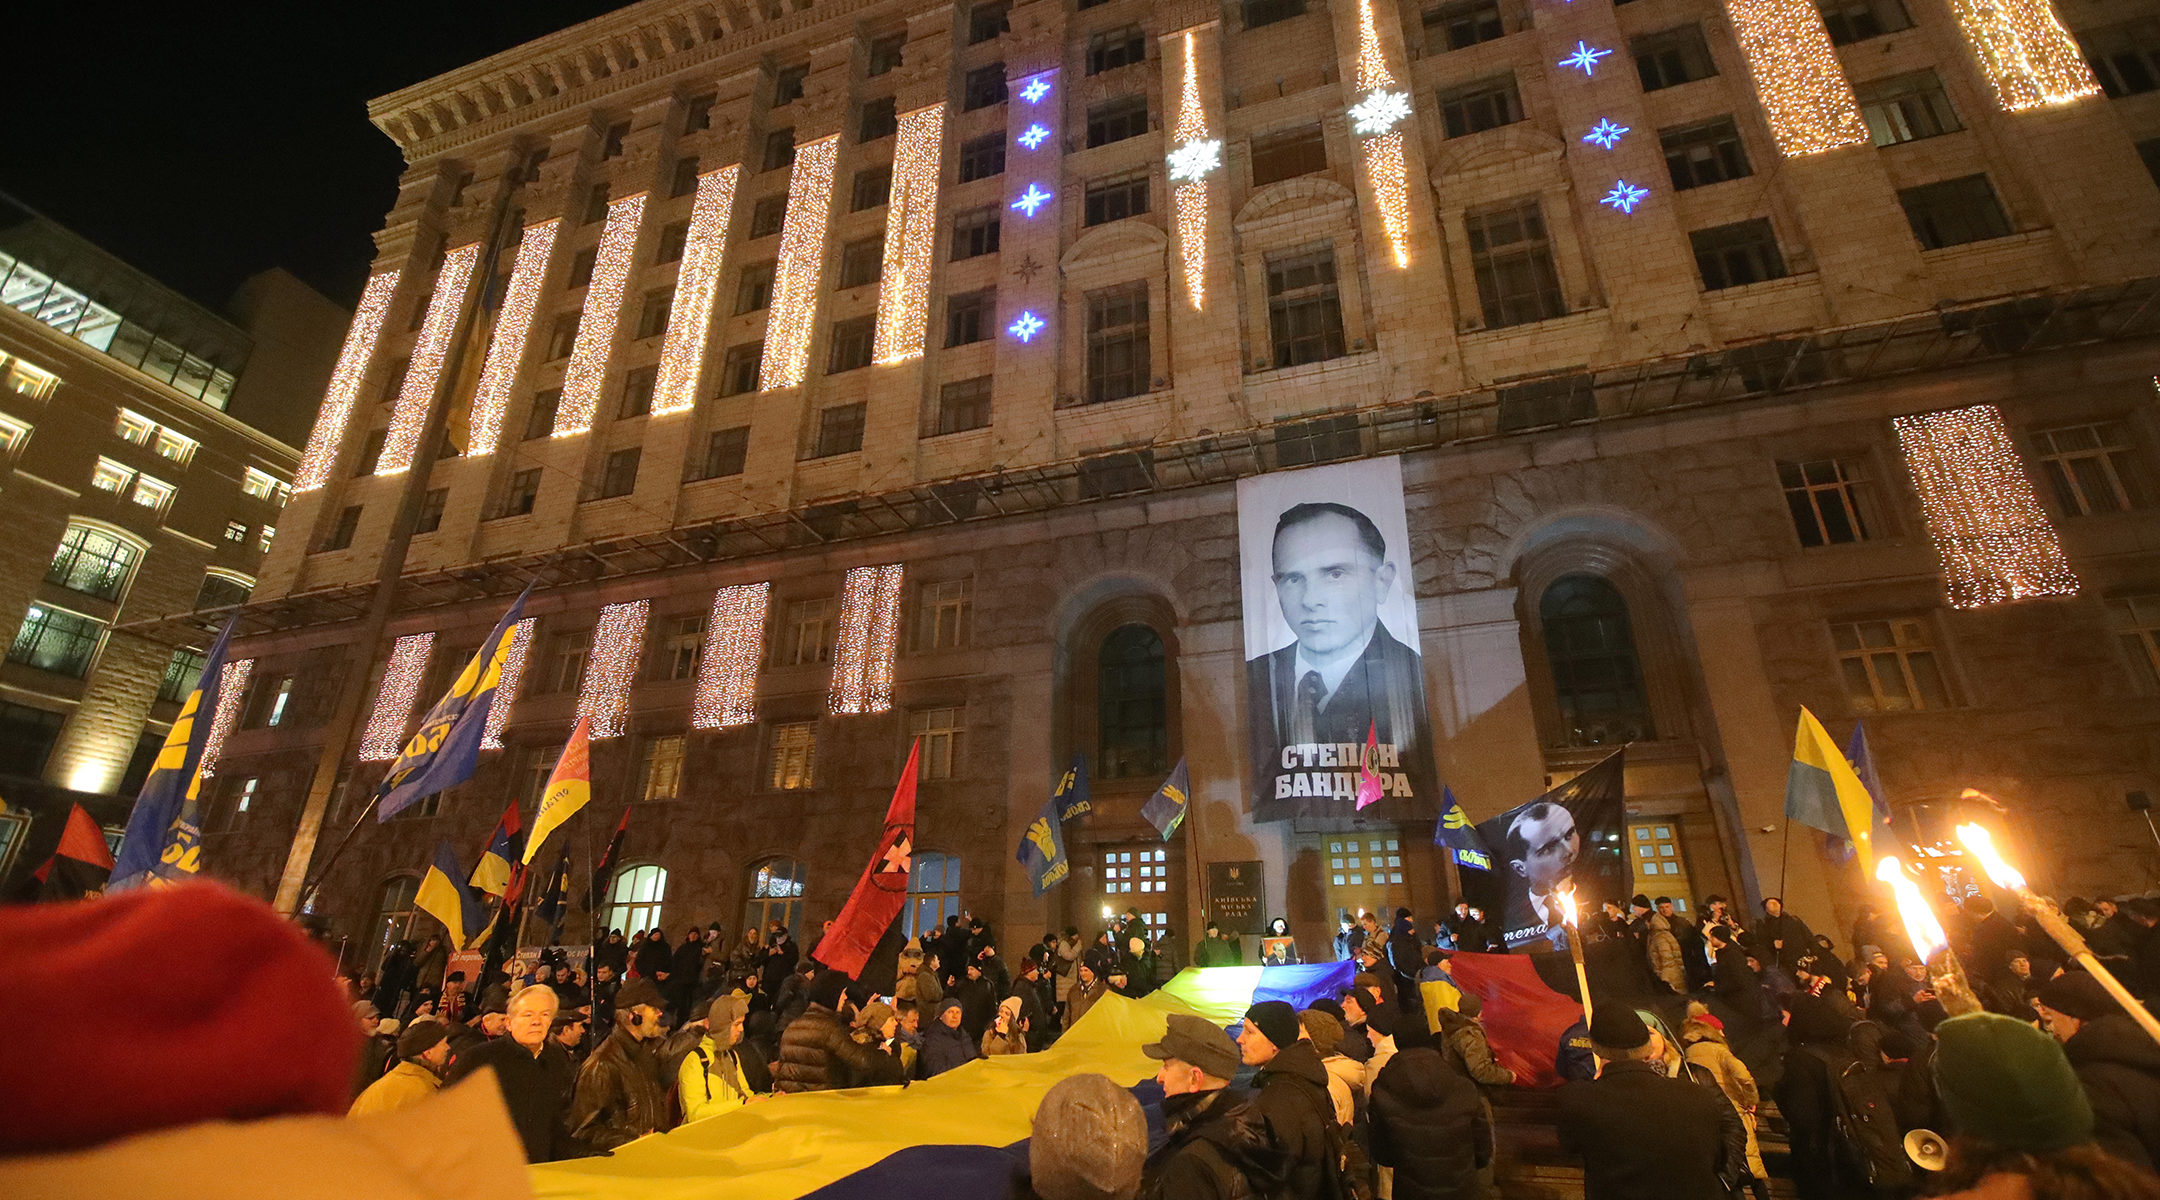 Marchers rally outside the Kyiv City State Administration during a torchlight procession honoring Stepan Bandera, in Kyiv, Ukraine on Jan. 1, 2020. (Pavlo_Bagmut/ Ukrinform / Barcroft Media via Getty Images)